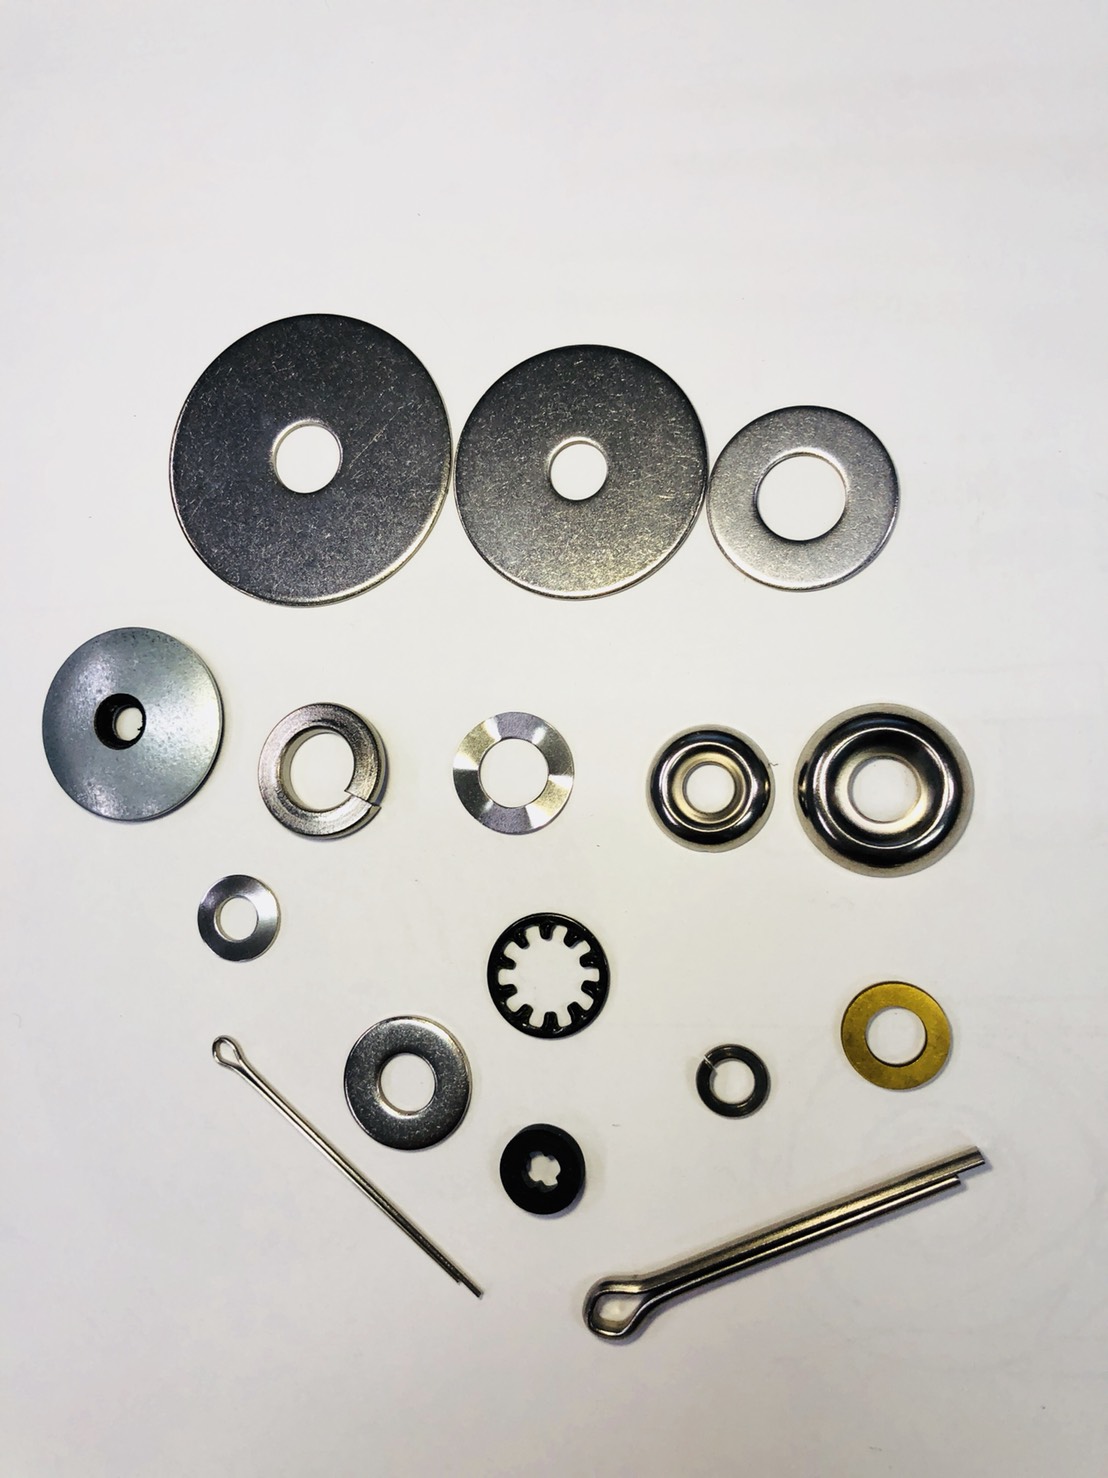 Flat Washers, Fender Washers, Cotter Pins, Hinge Pins, Cup Washers.